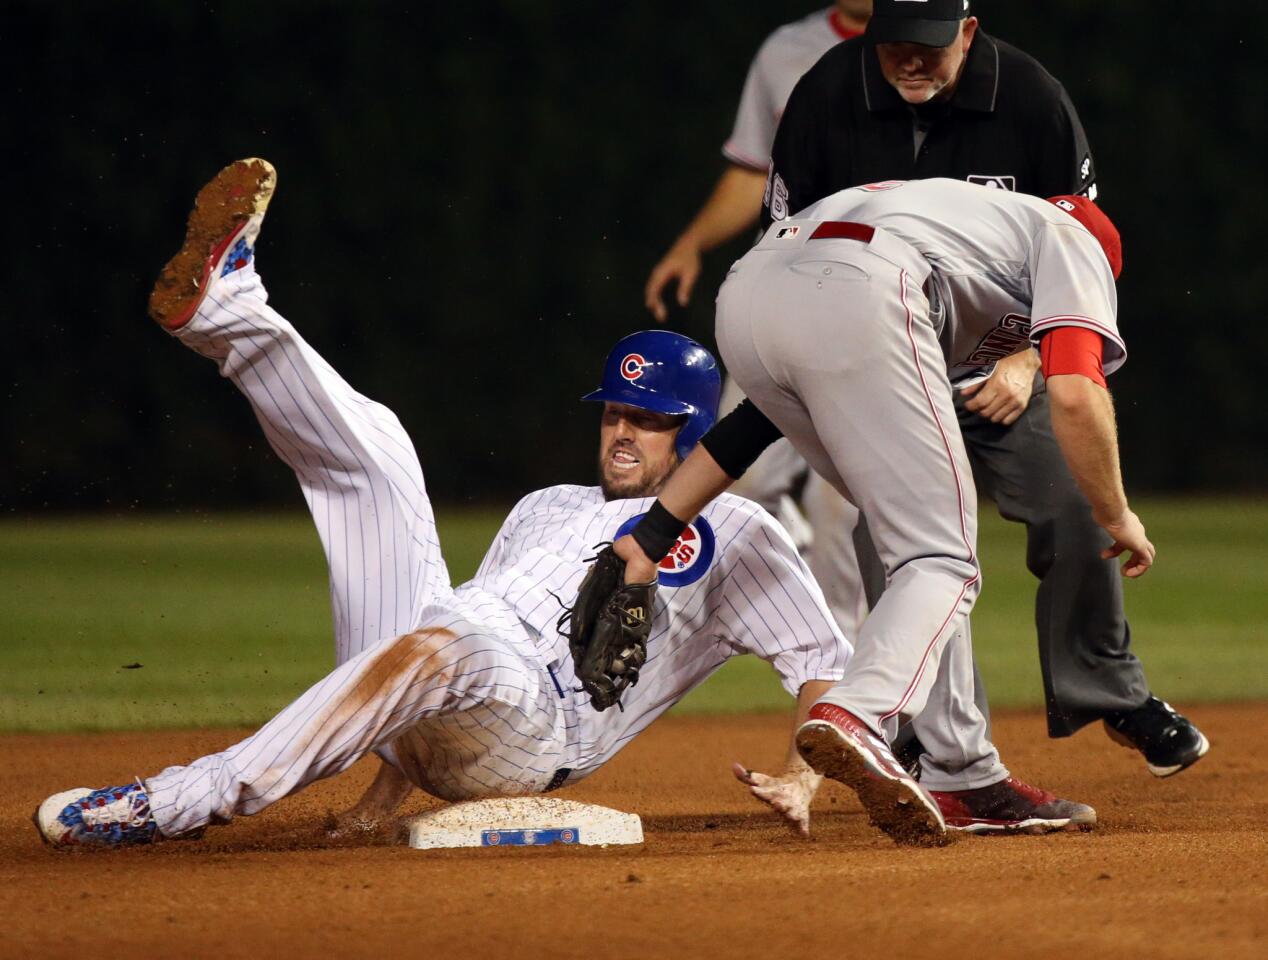 Cubs starting pitcher John Lackey steals second base in front of Reds shortstop Zack Cozart during the fourth inning at Wrigley Field on Wednesday, Aug. 16, 2017.